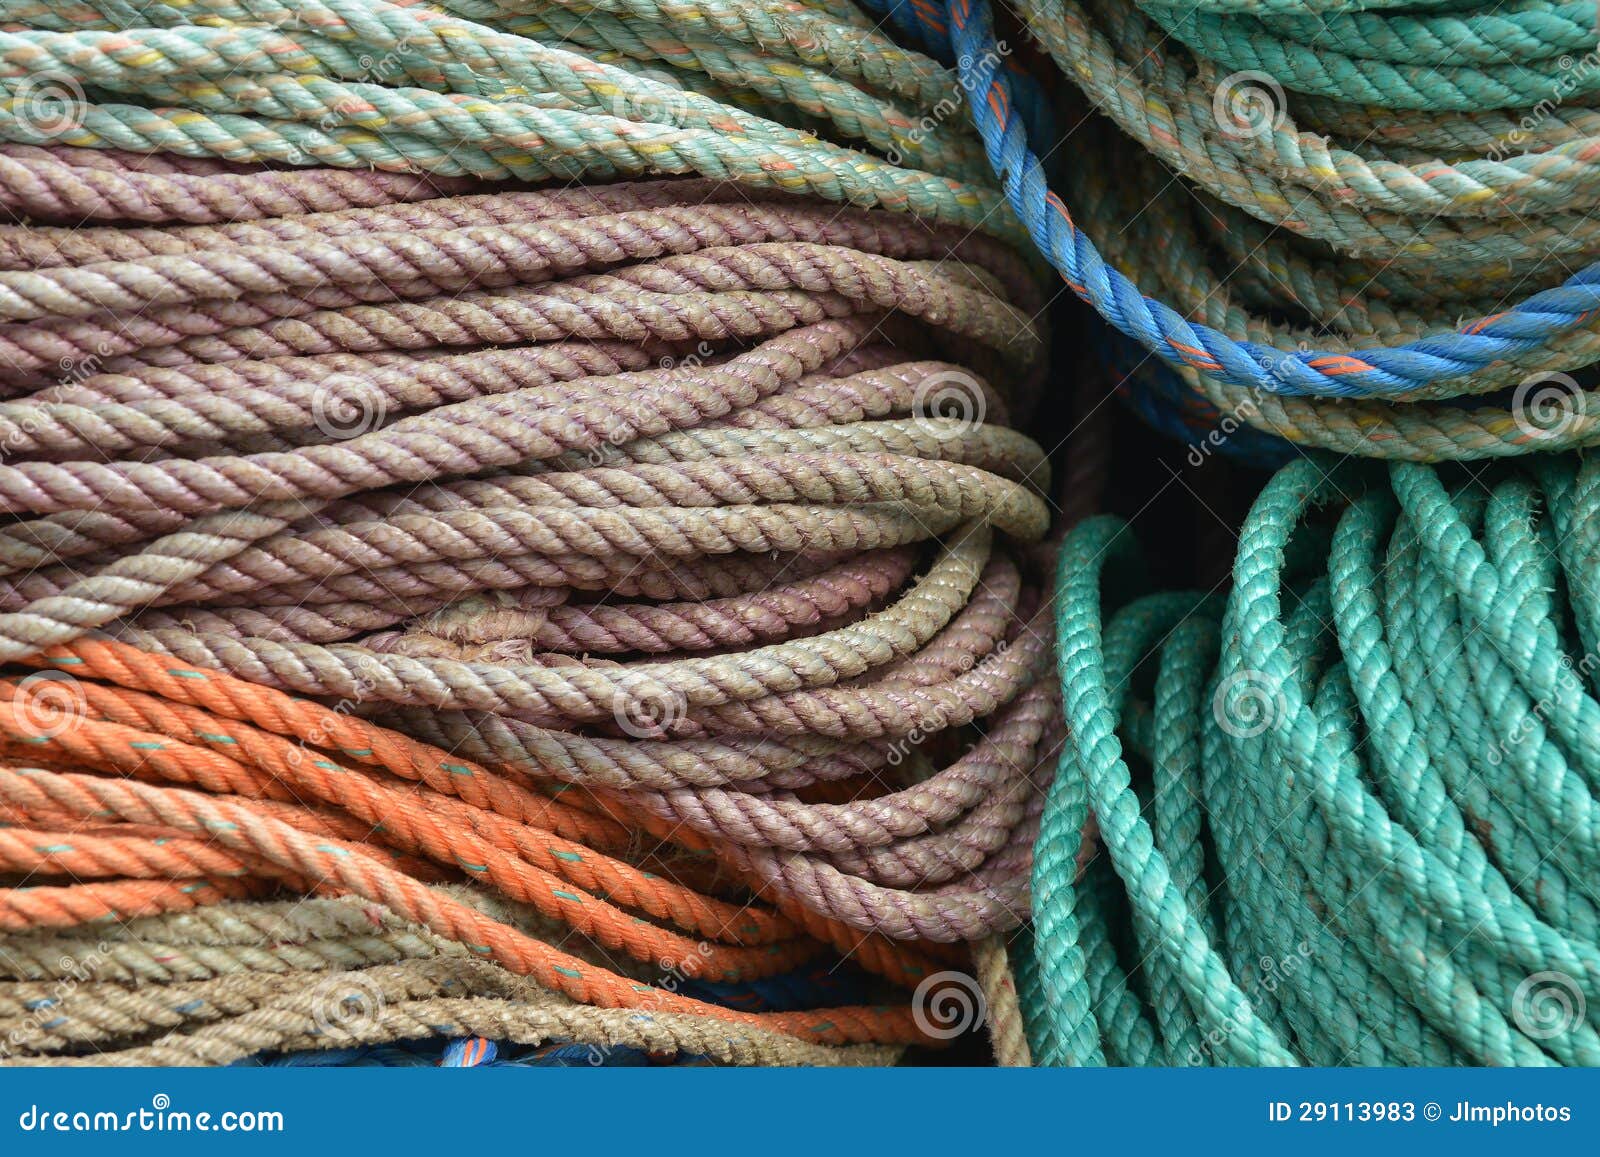 Nylon Rope Used for Lobster Fishing Details Stock Image - Image of